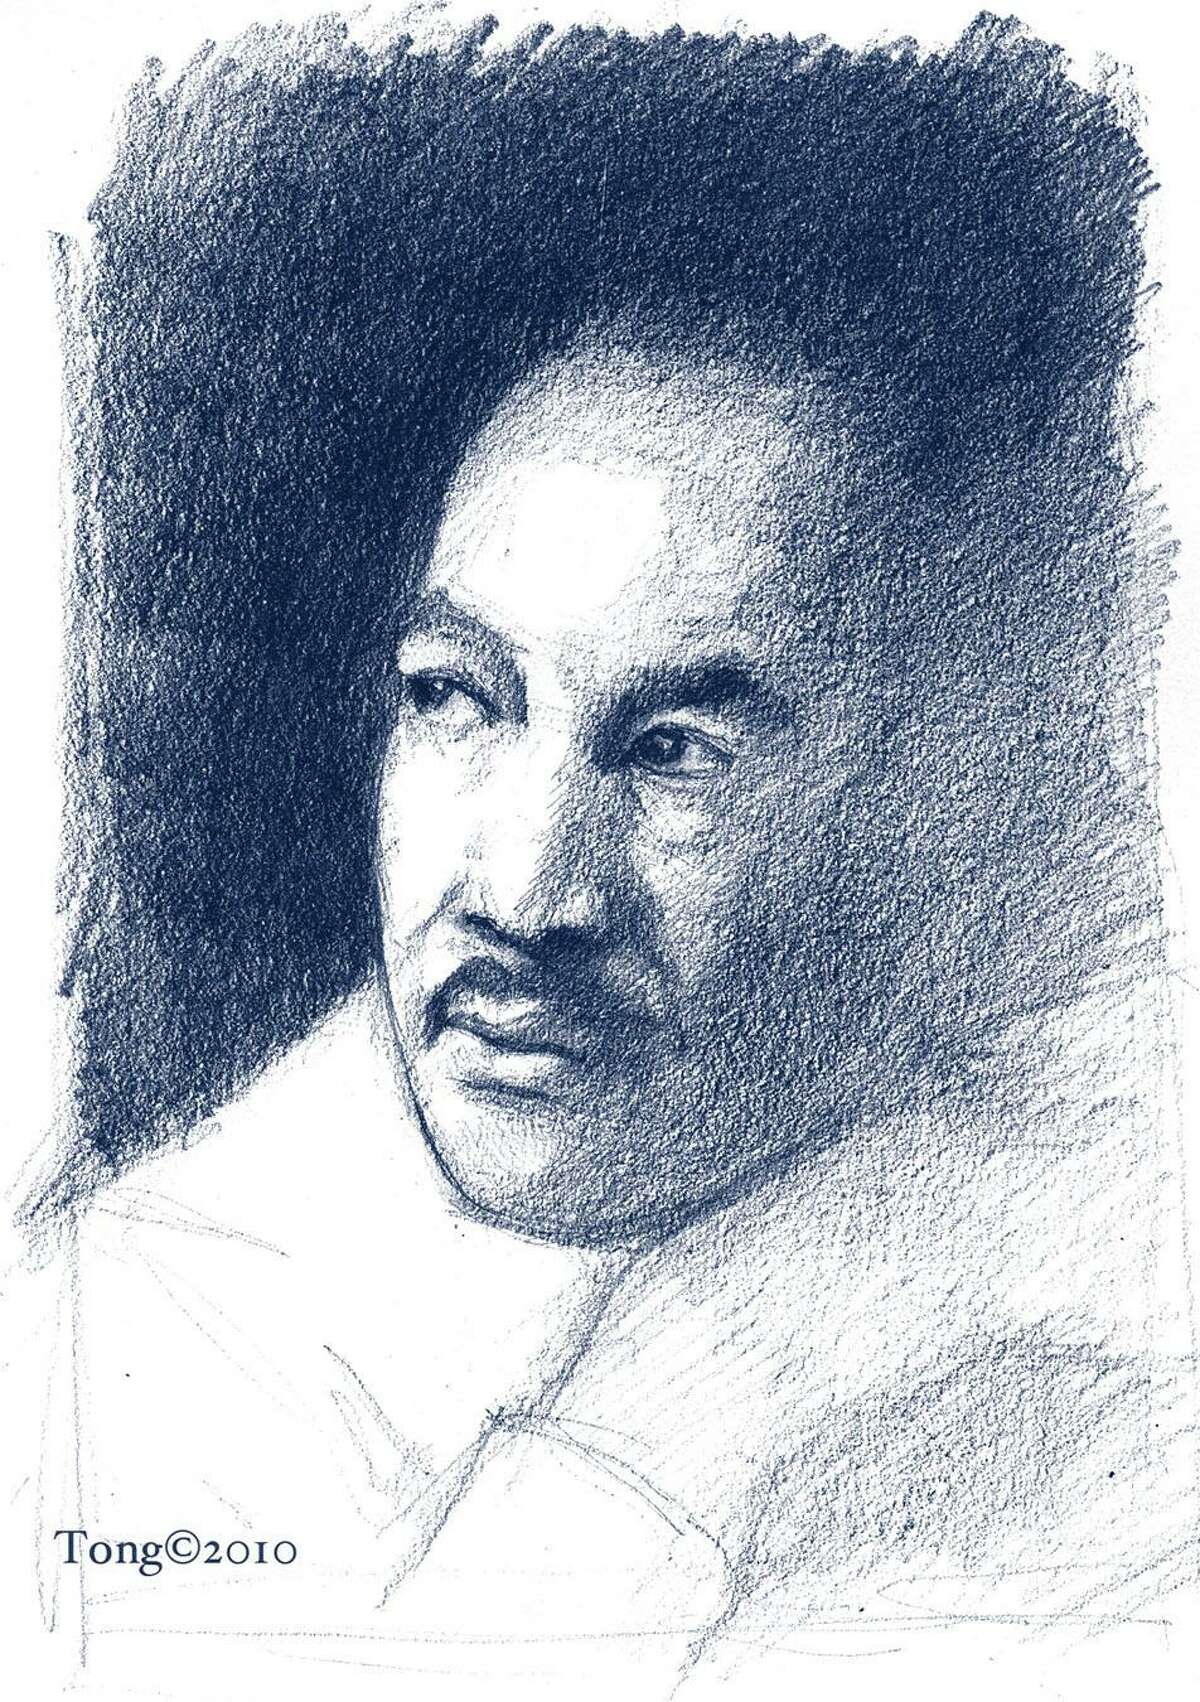 This artwork by Paul Tong relates to the Rev. Martin Luther King